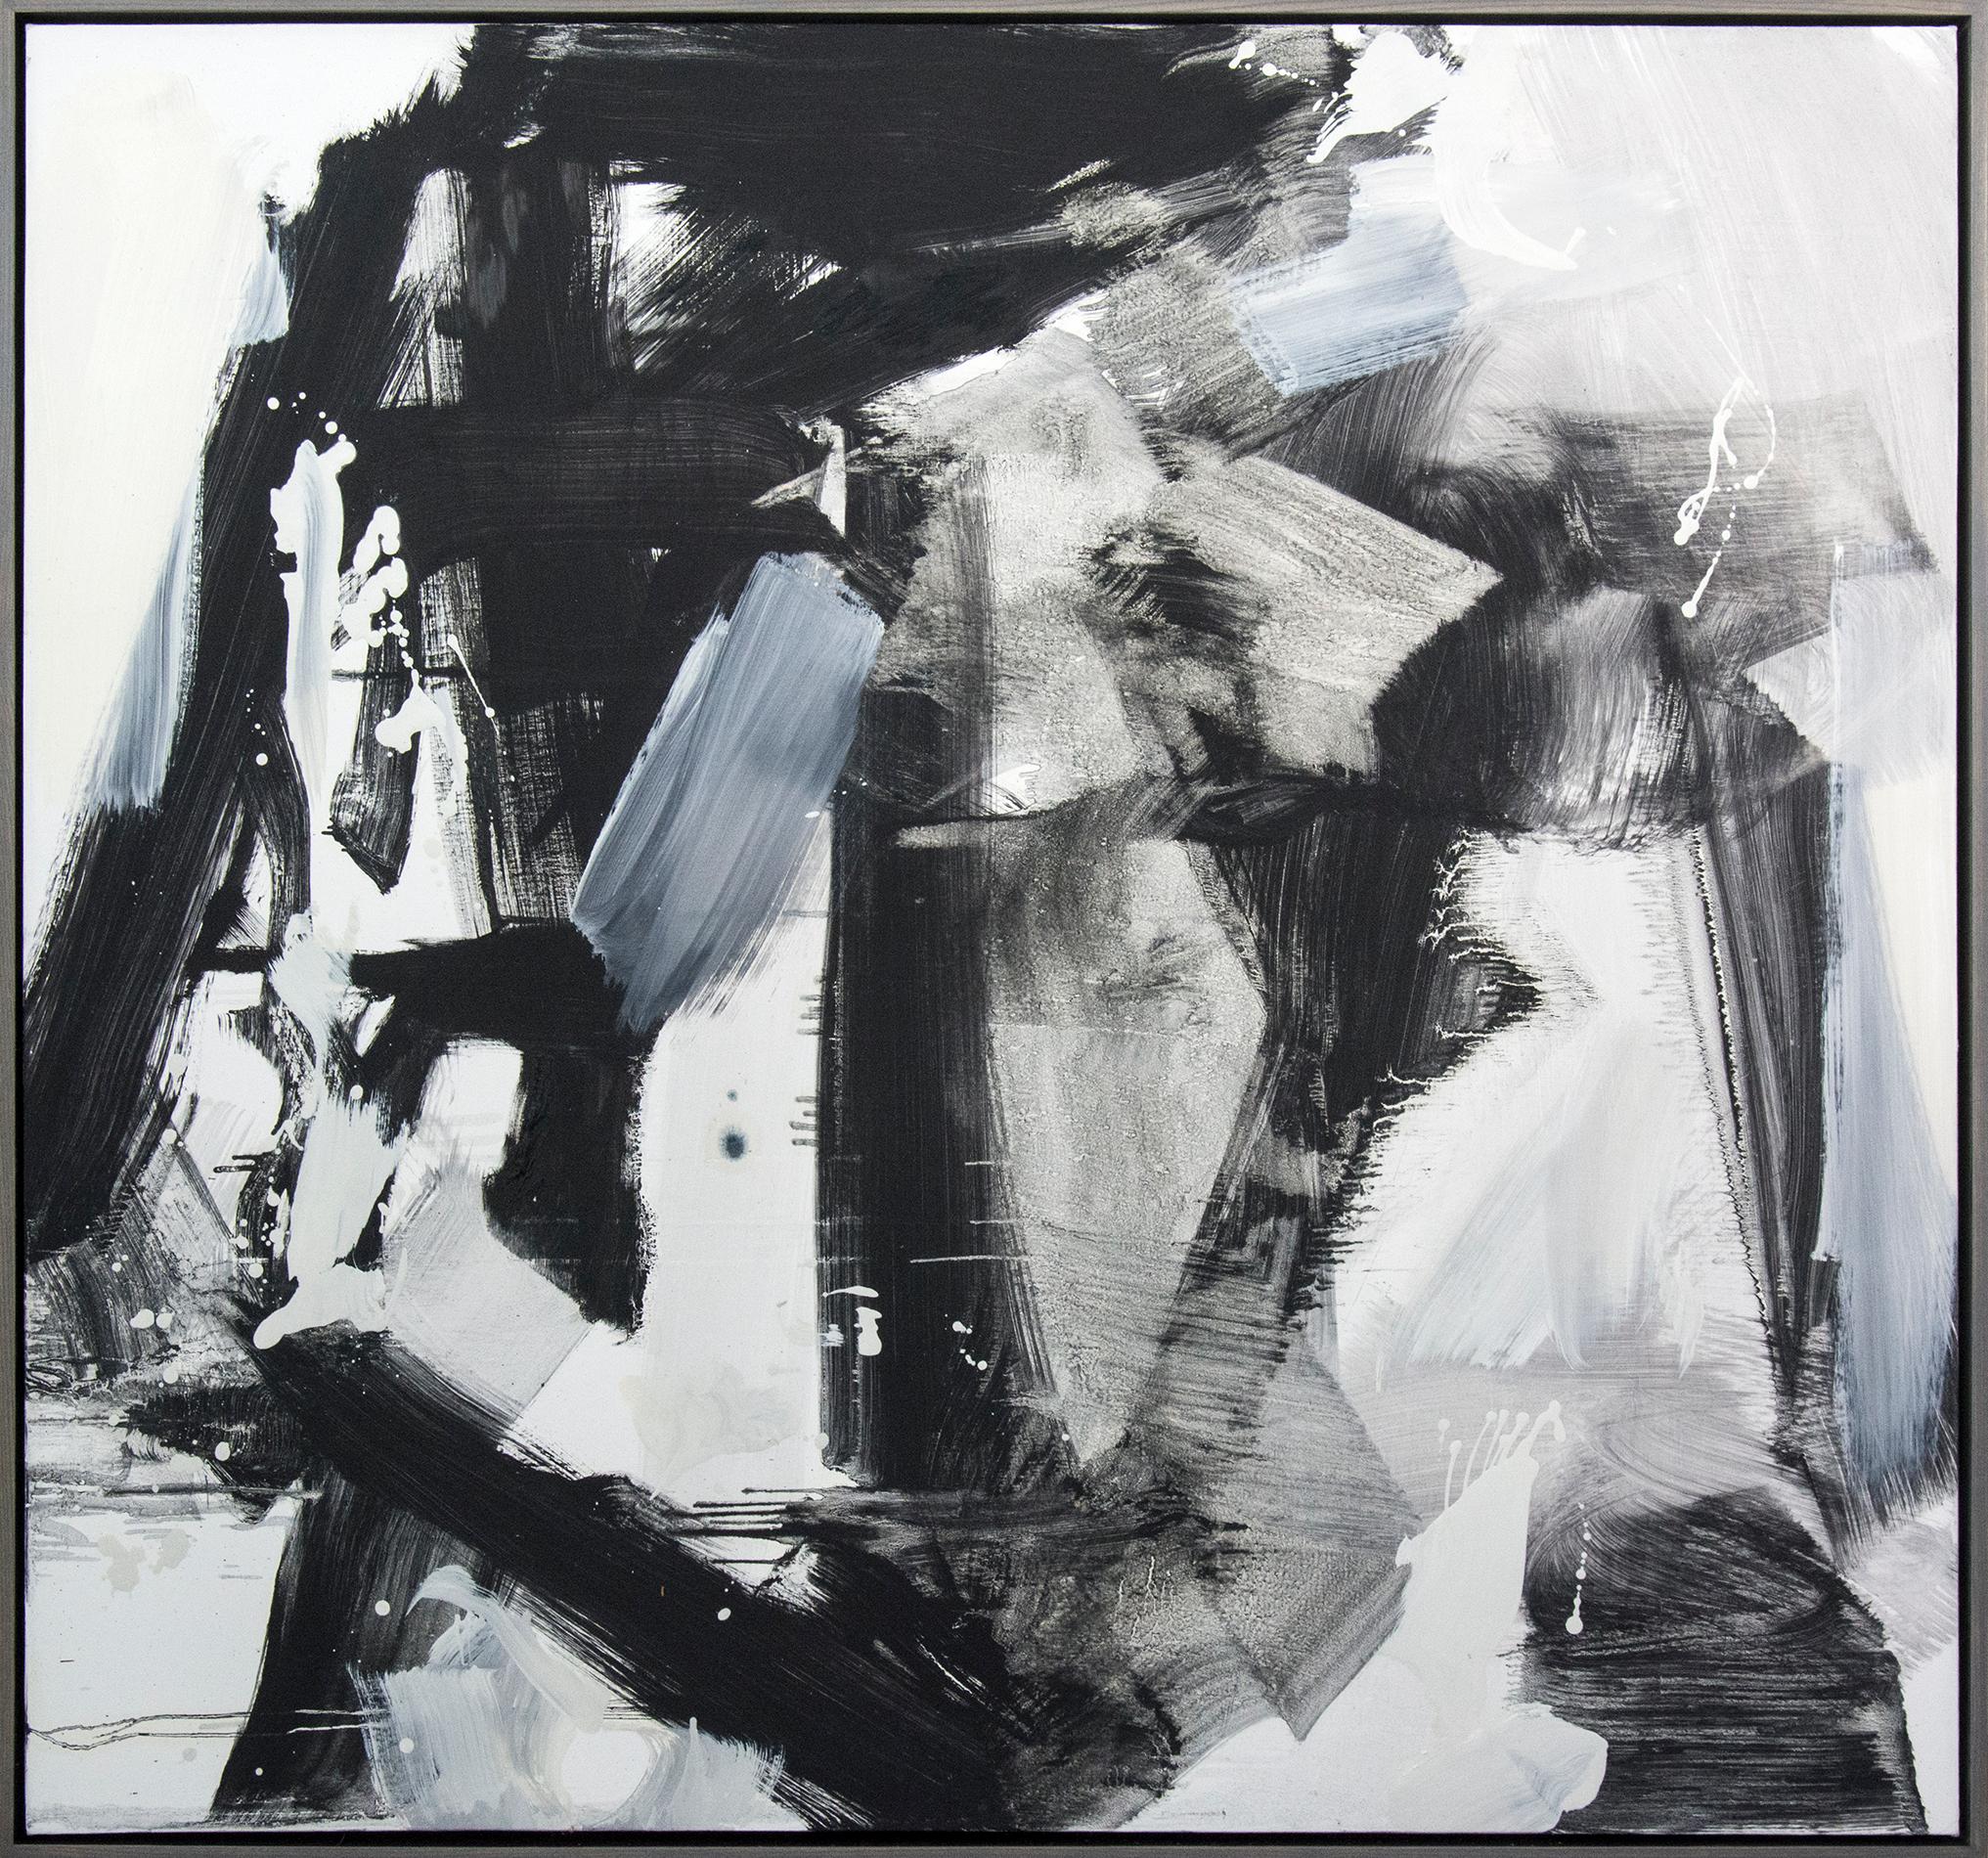 Scott Pattinson Abstract Painting - Hvodjra No 13 - large, black, white, grey, gestural abstract, oil on canvas